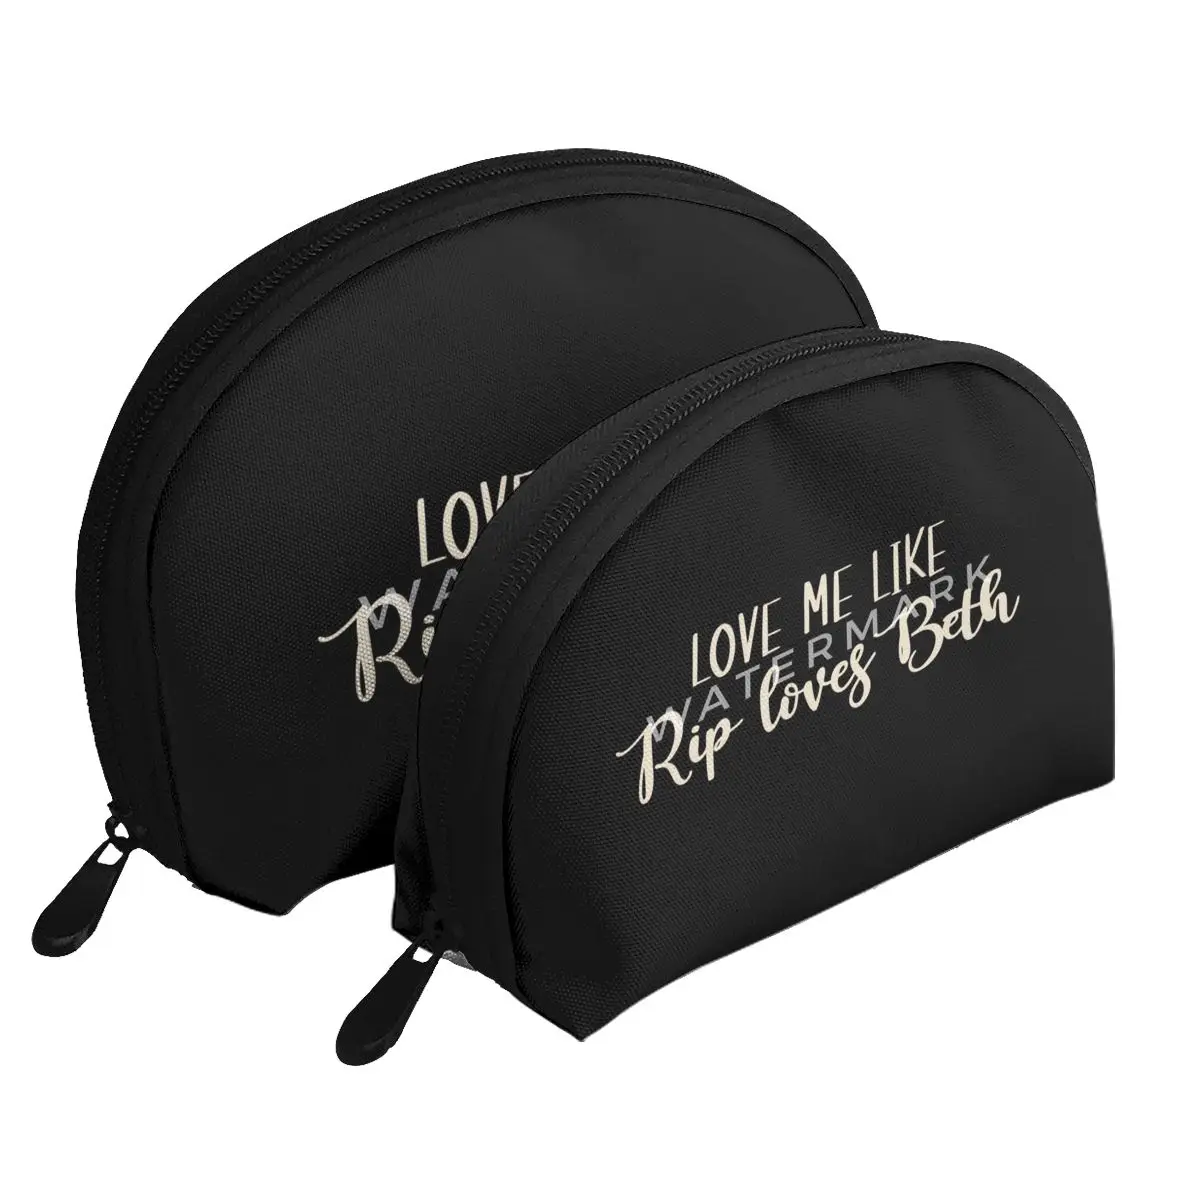 

Love Me Like Rip Loves Beth Portable Bags Clutch Pouch Storage Bag Outdoor ActivitiesCompartmentalised